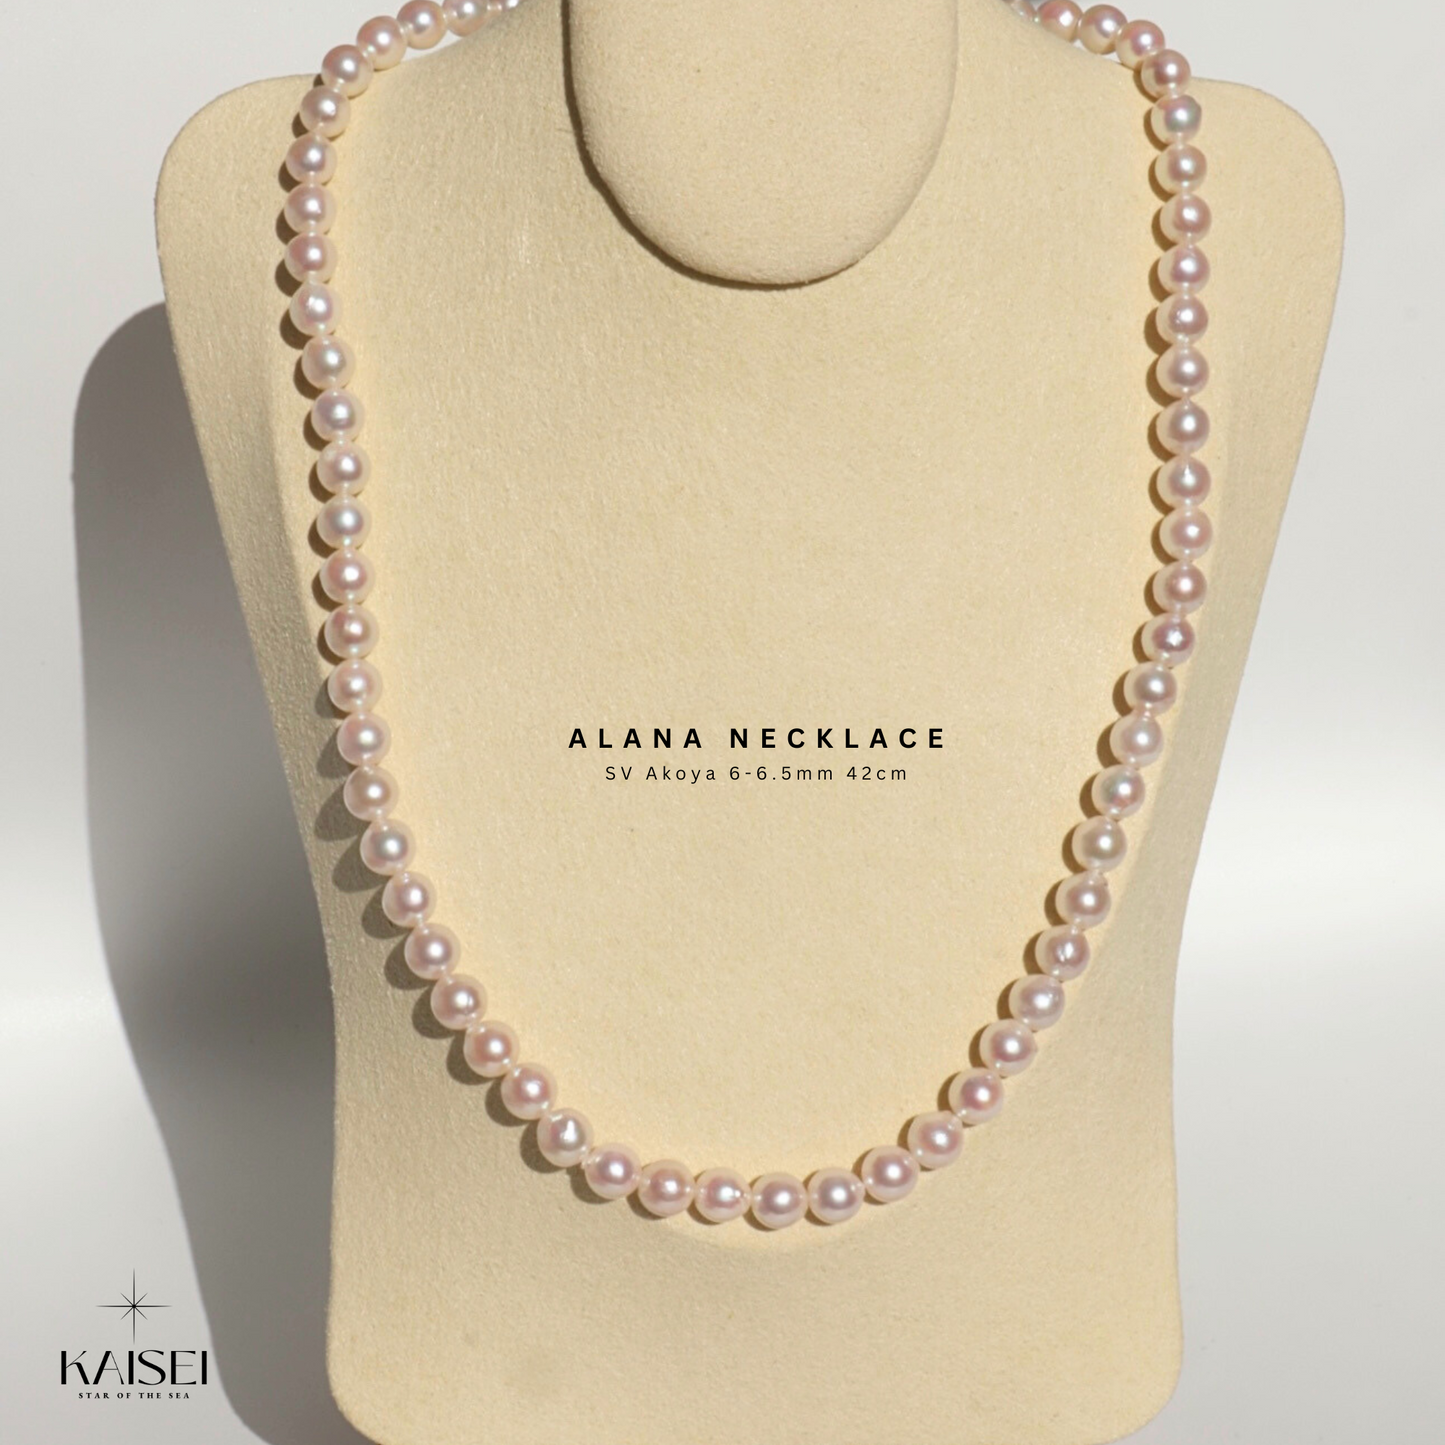 Kaisei Pearl - Alana Necklace Akoya Pearl 6-6.5mm Silver Pearl Jewelry 42cm